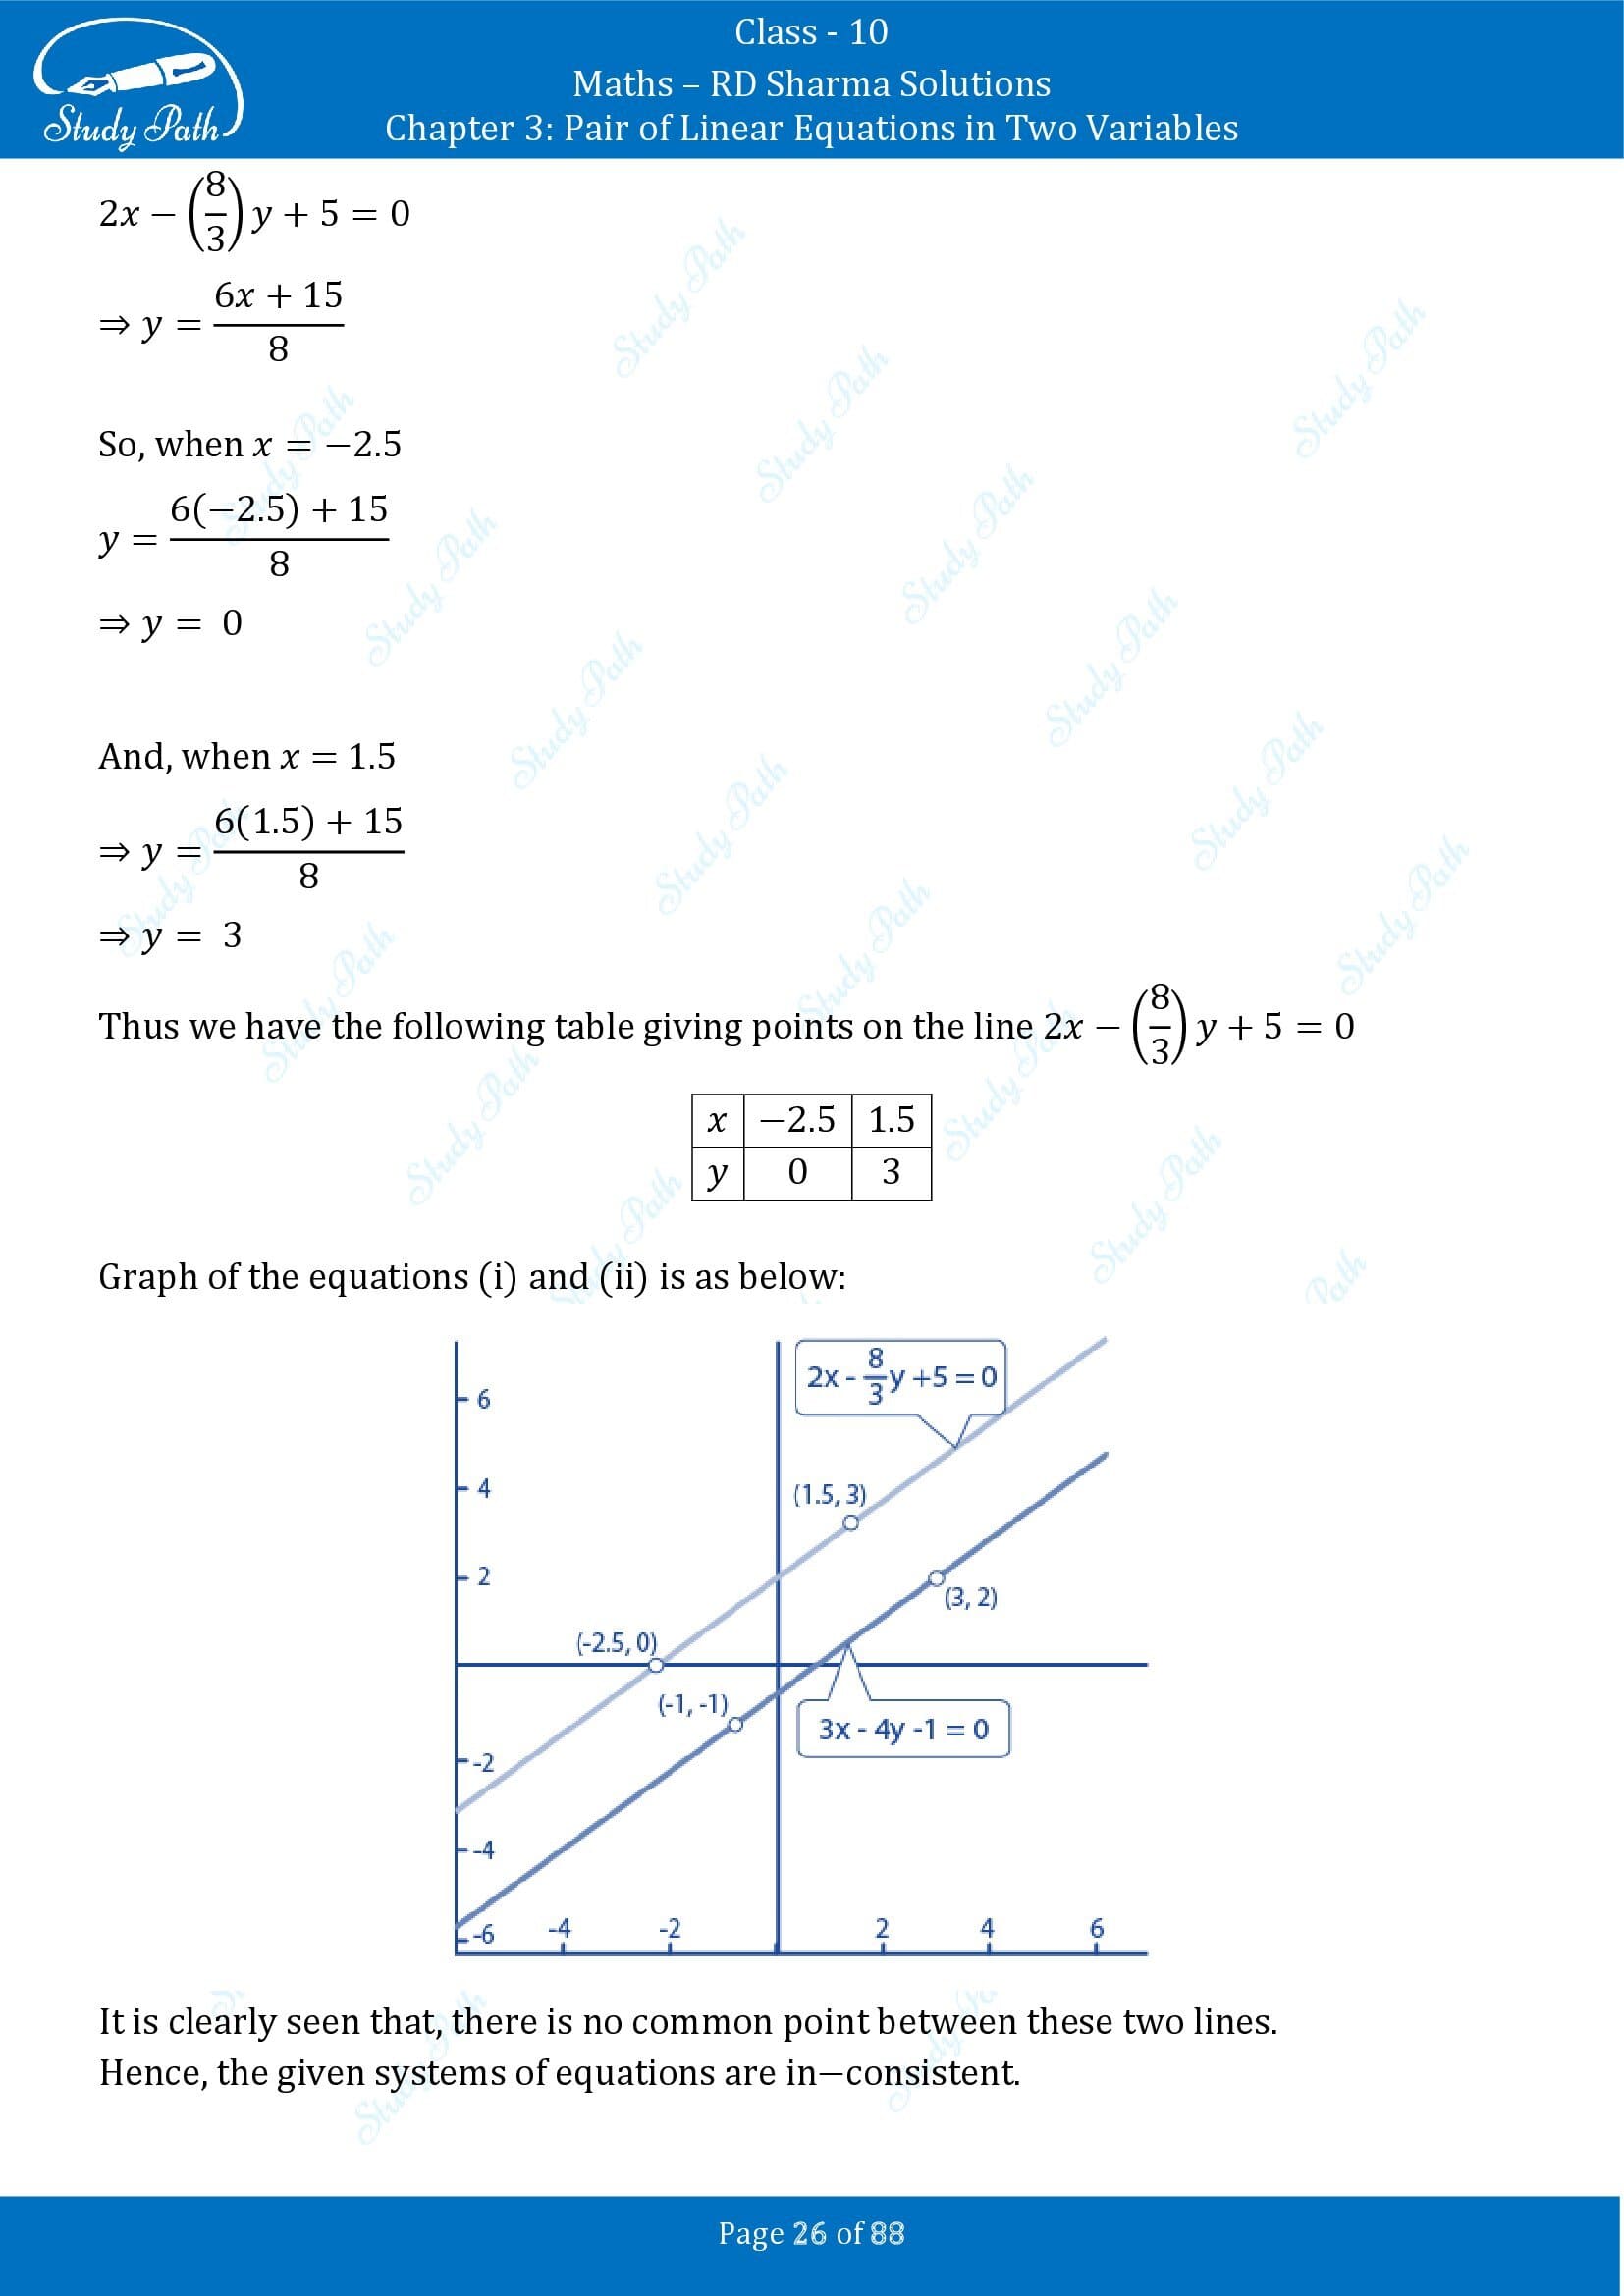 RD Sharma Solutions Class 10 Chapter 3 Pair of Linear Equations in Two Variables Exercise 3.2 00026